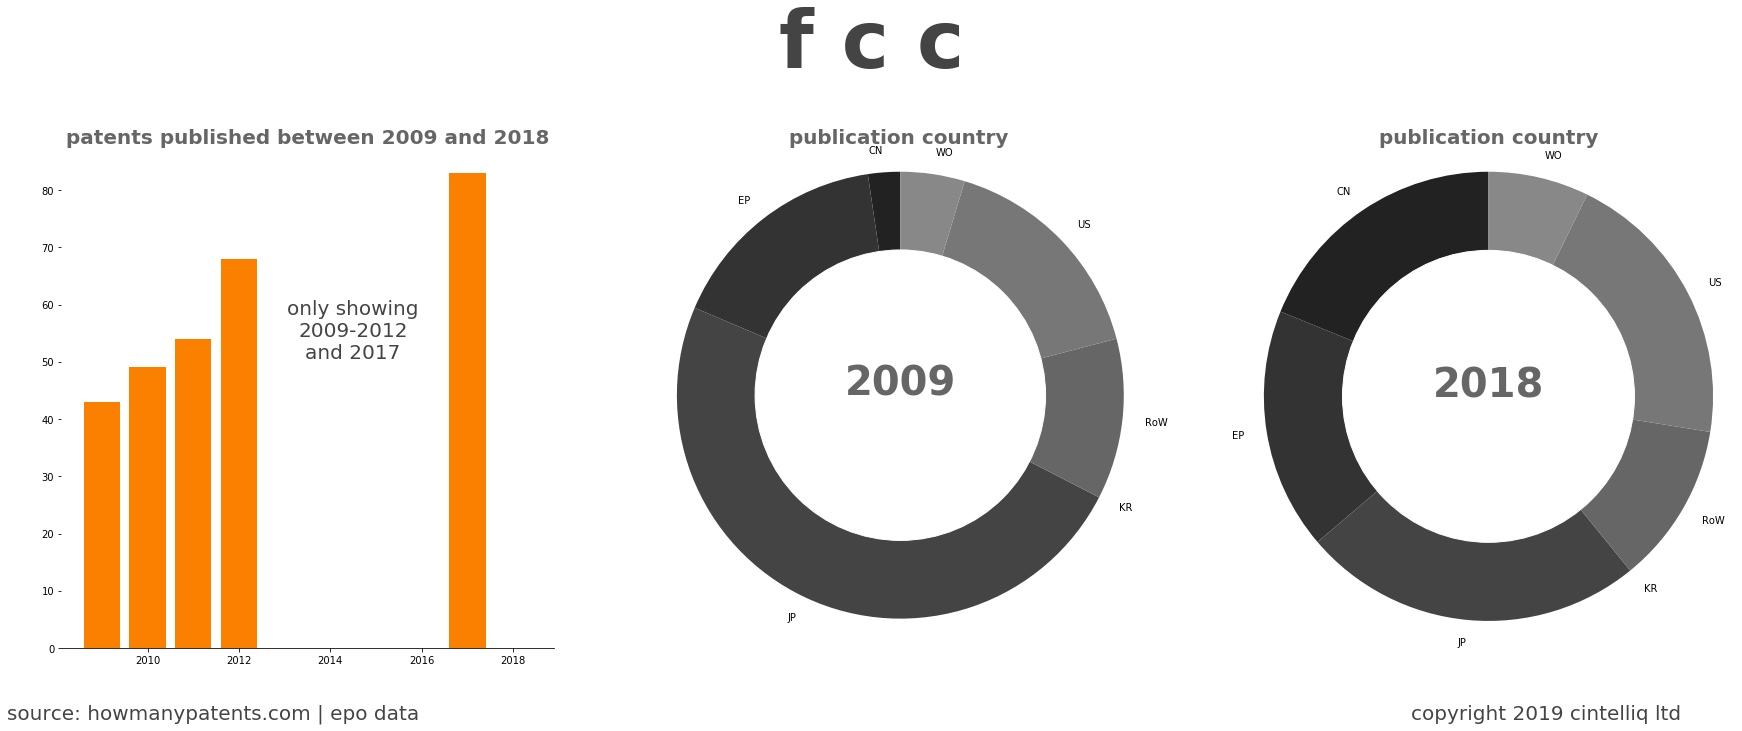 summary of patents for F C C